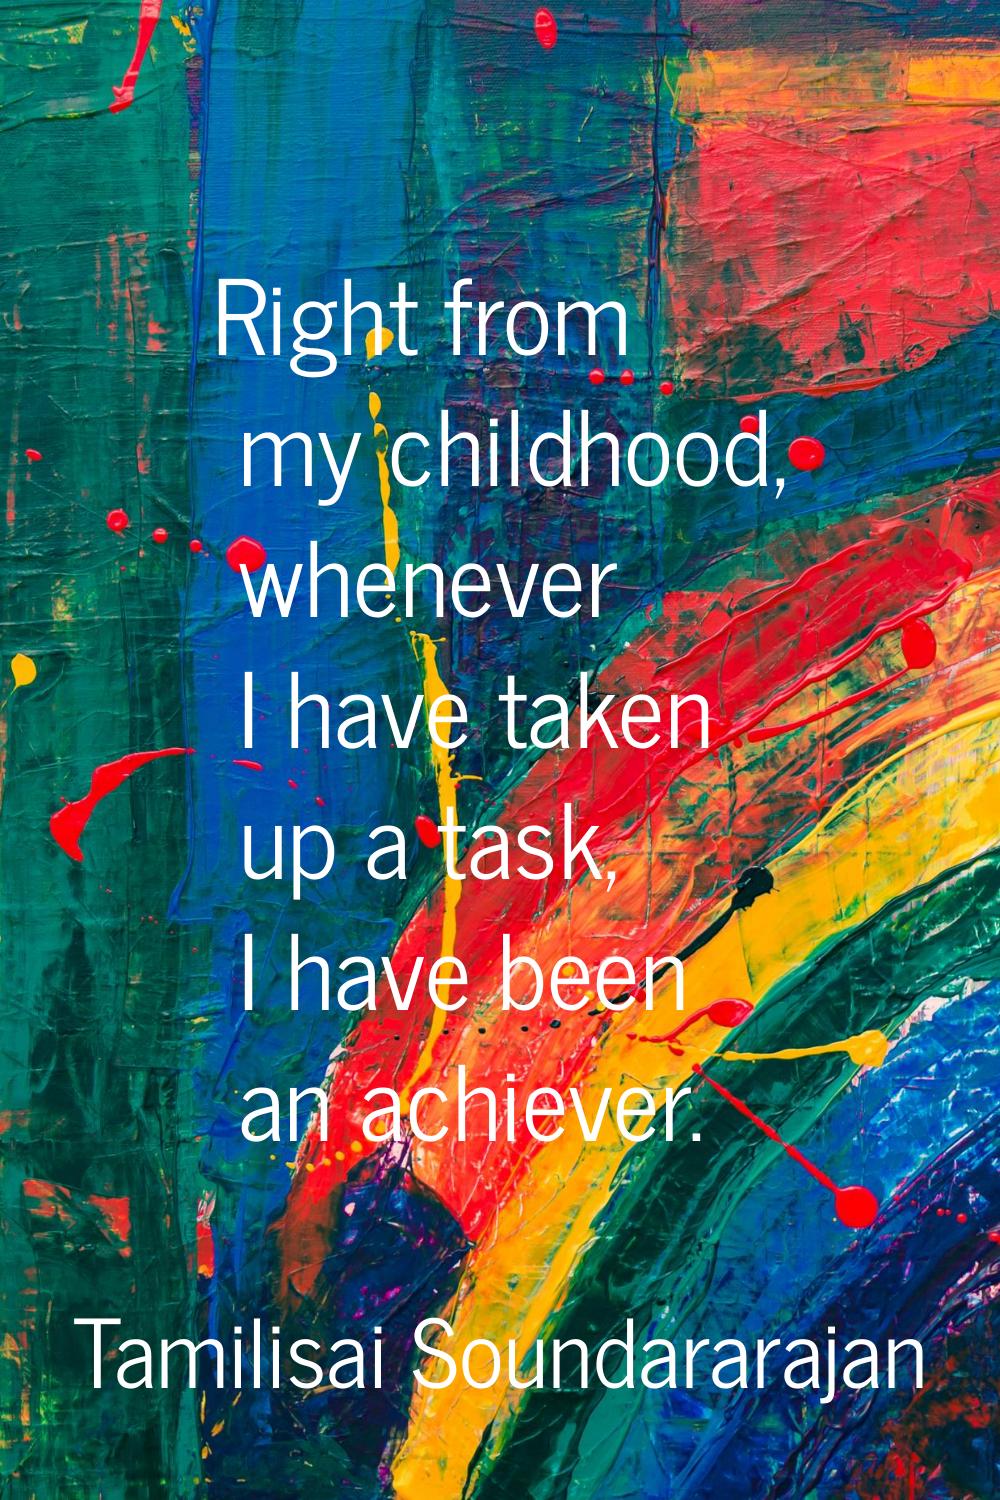 Right from my childhood, whenever I have taken up a task, I have been an achiever.